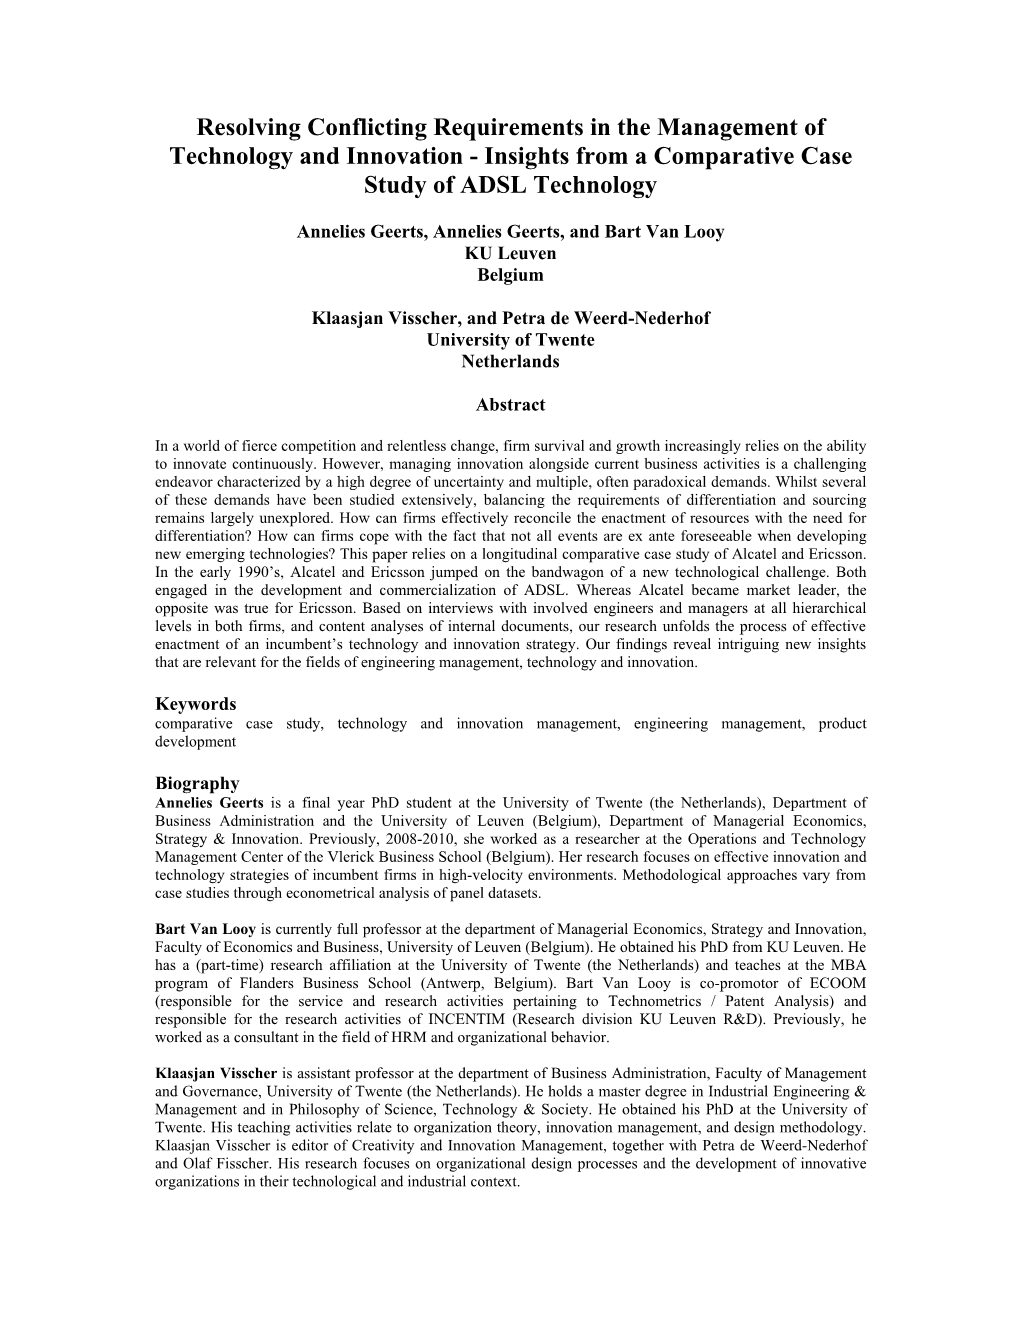 Resolving Conflicting Requirements in the Management of Technology and Innovation - Insights from a Comparative Case Study of ADSL Technology